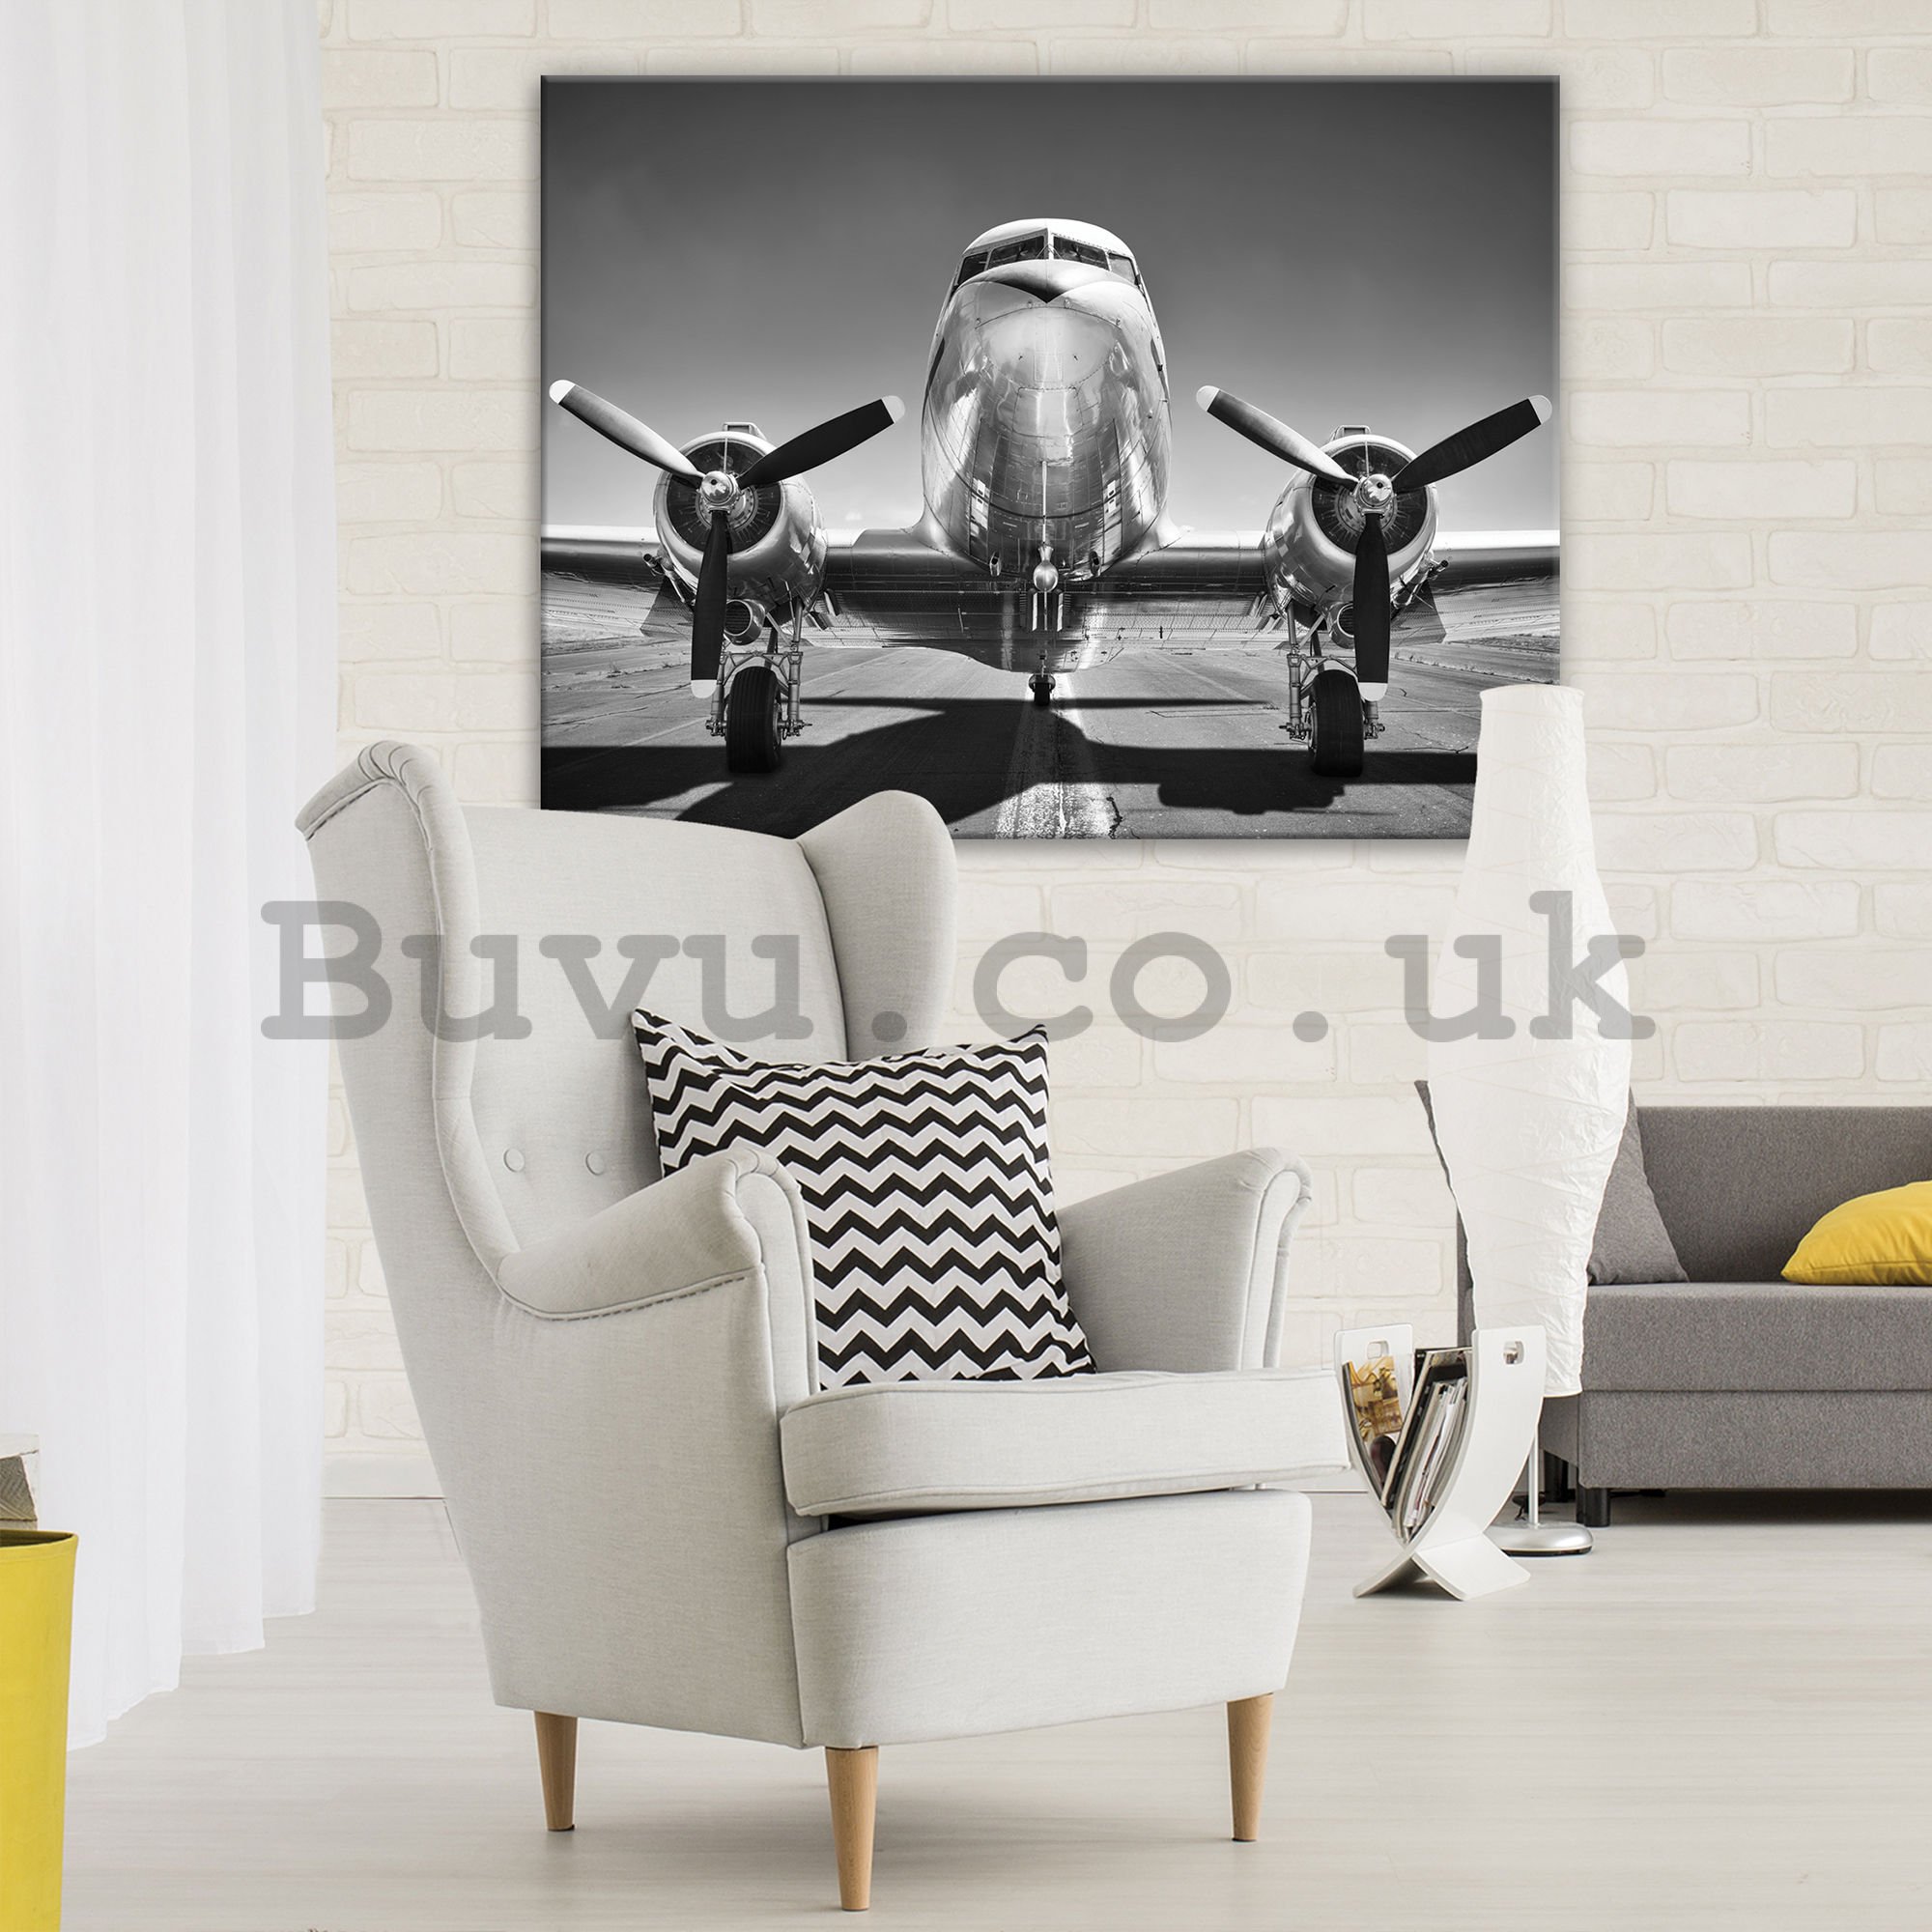 Painting on canvas: Aircraft Black & White (1) - 75x100 cm